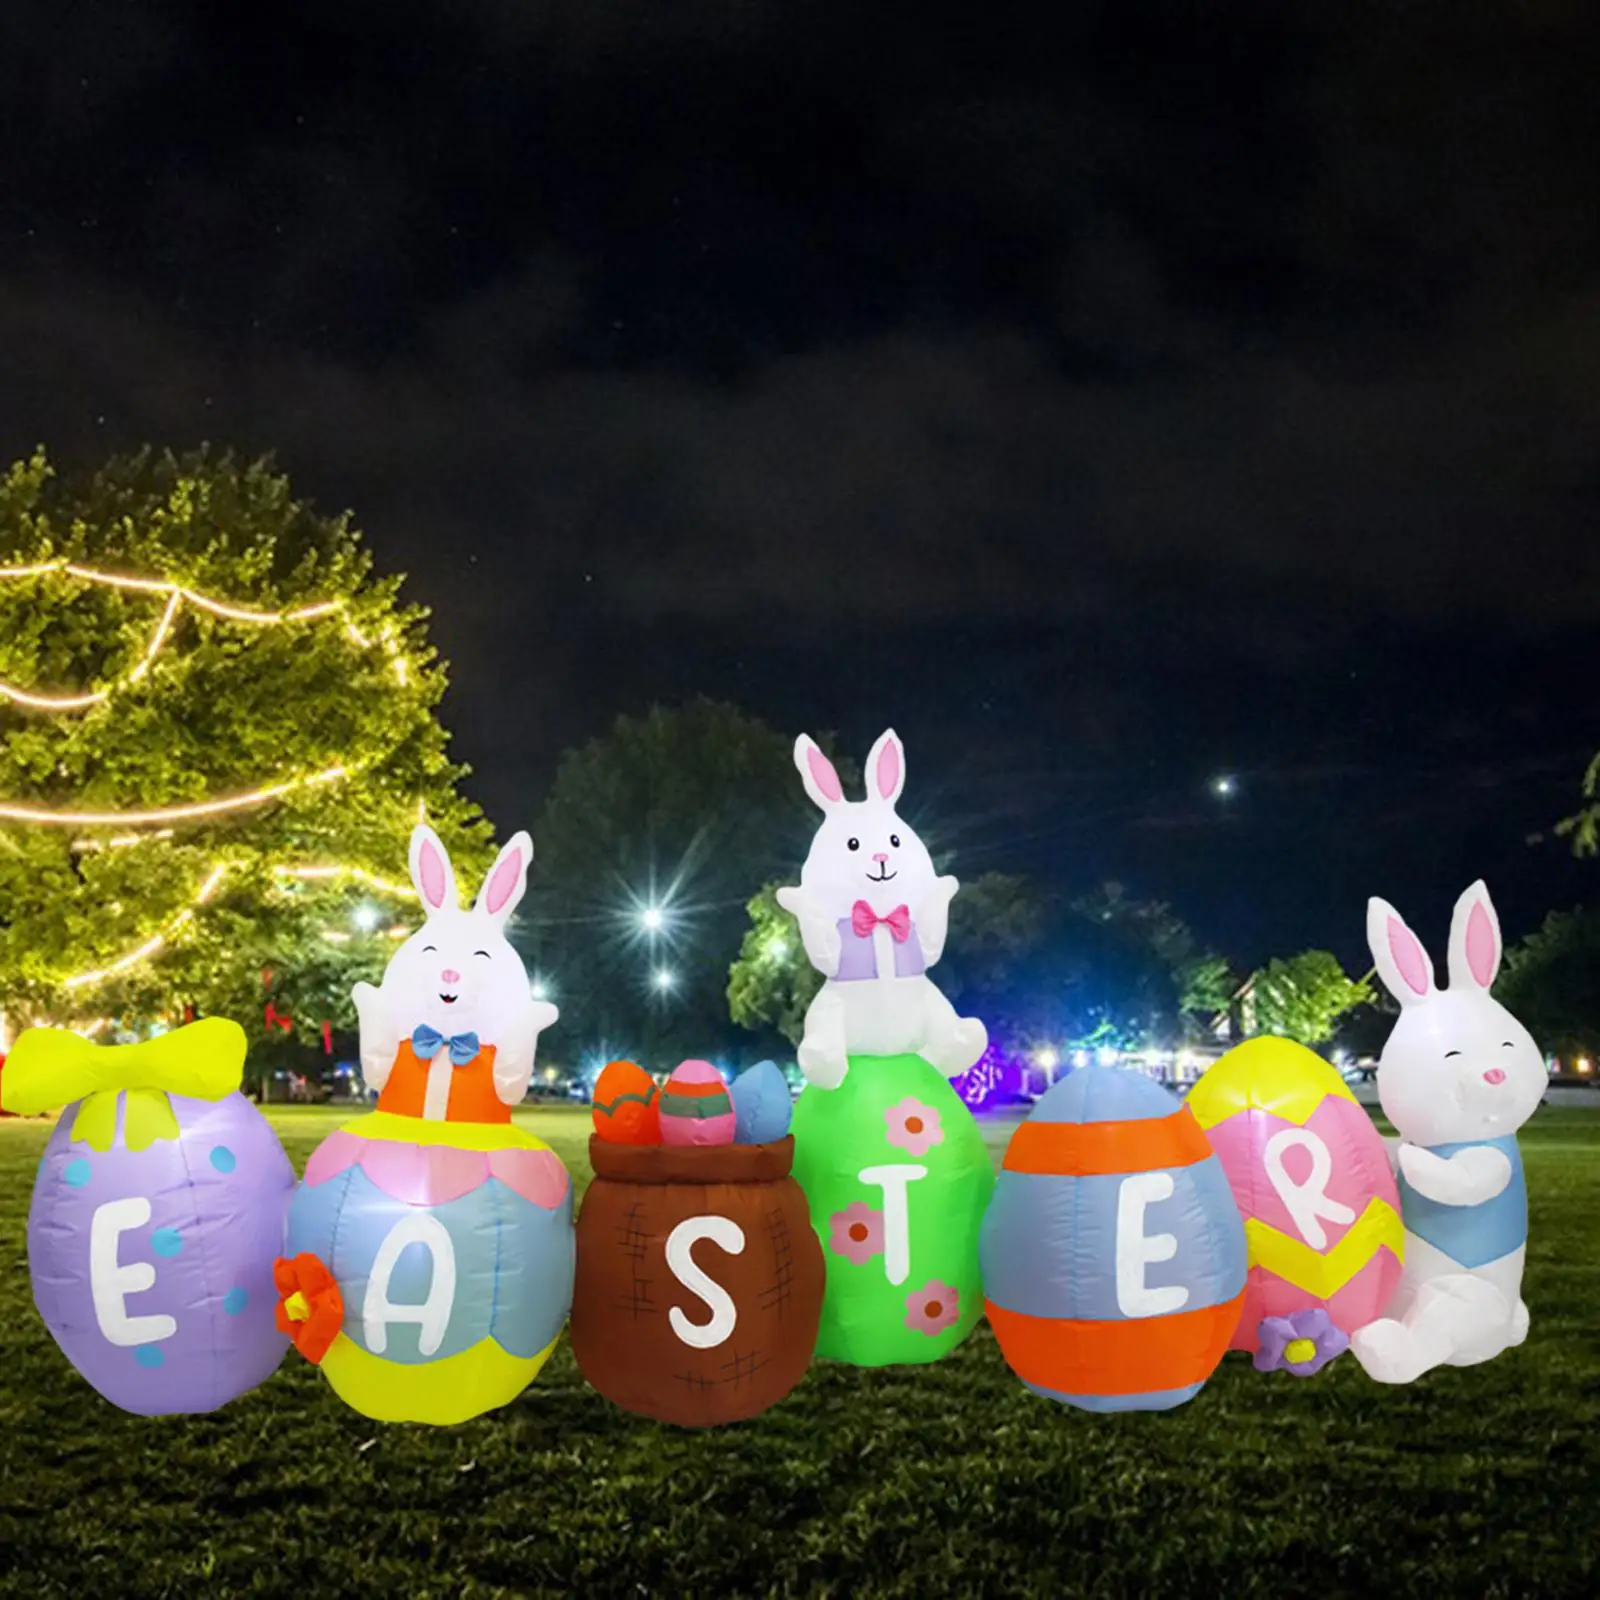 

10ft Easter Inflatables Outdoor Decorations Giant for Holiday Garden Lawn